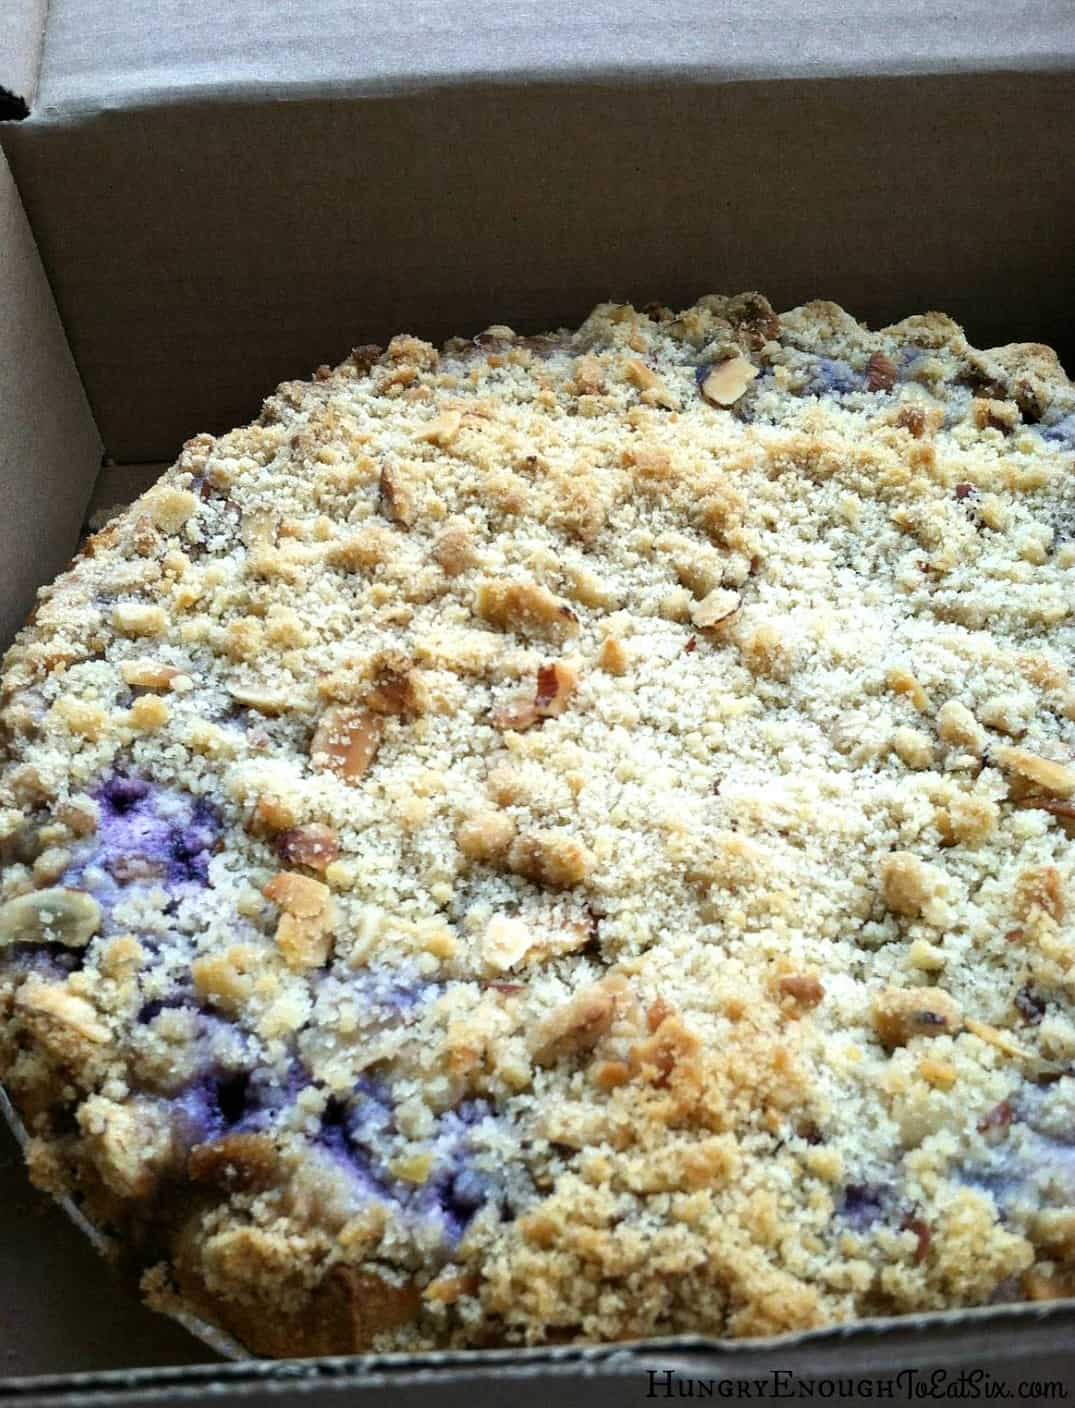 Crumb topped whole blueberry pie.